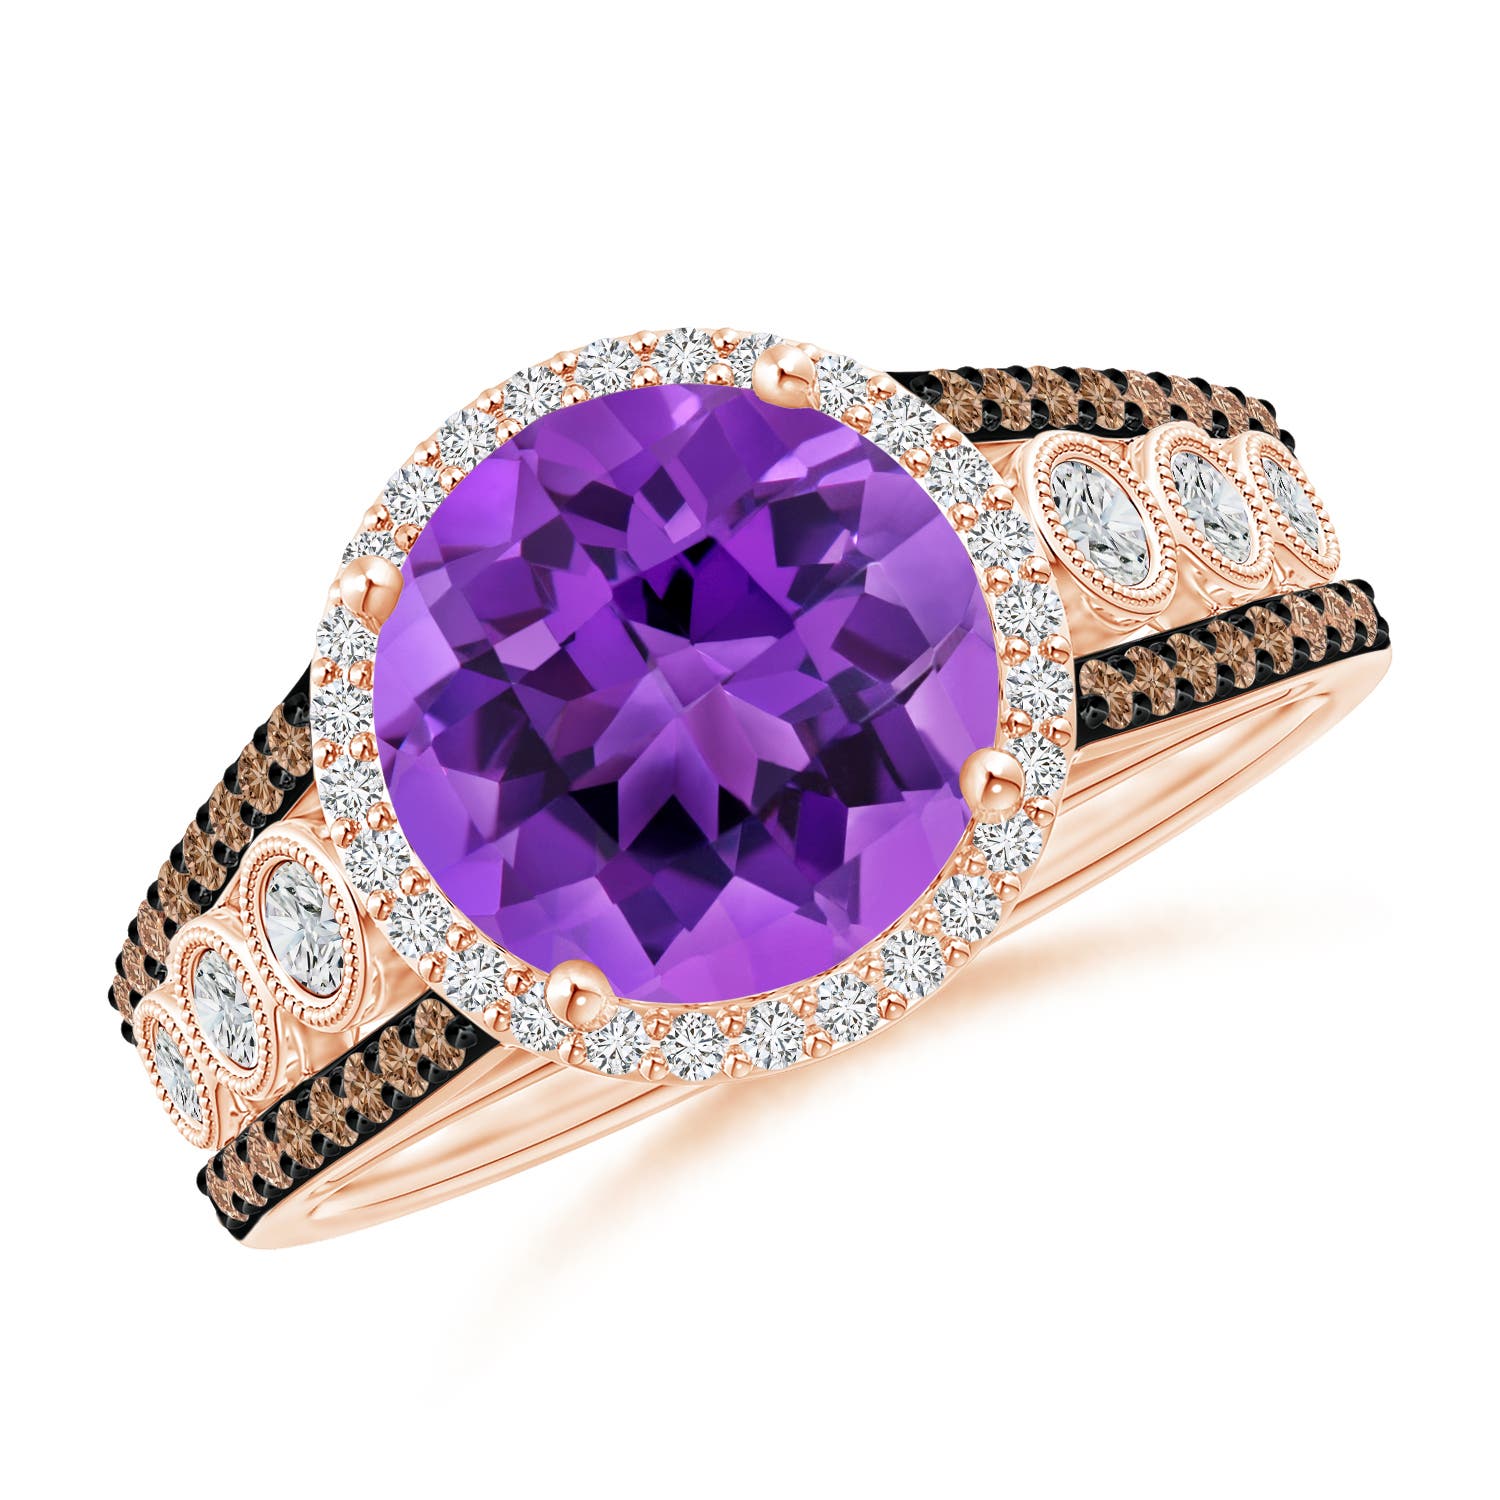 AAA - Amethyst / 2.64 CT / 14 KT Rose Gold